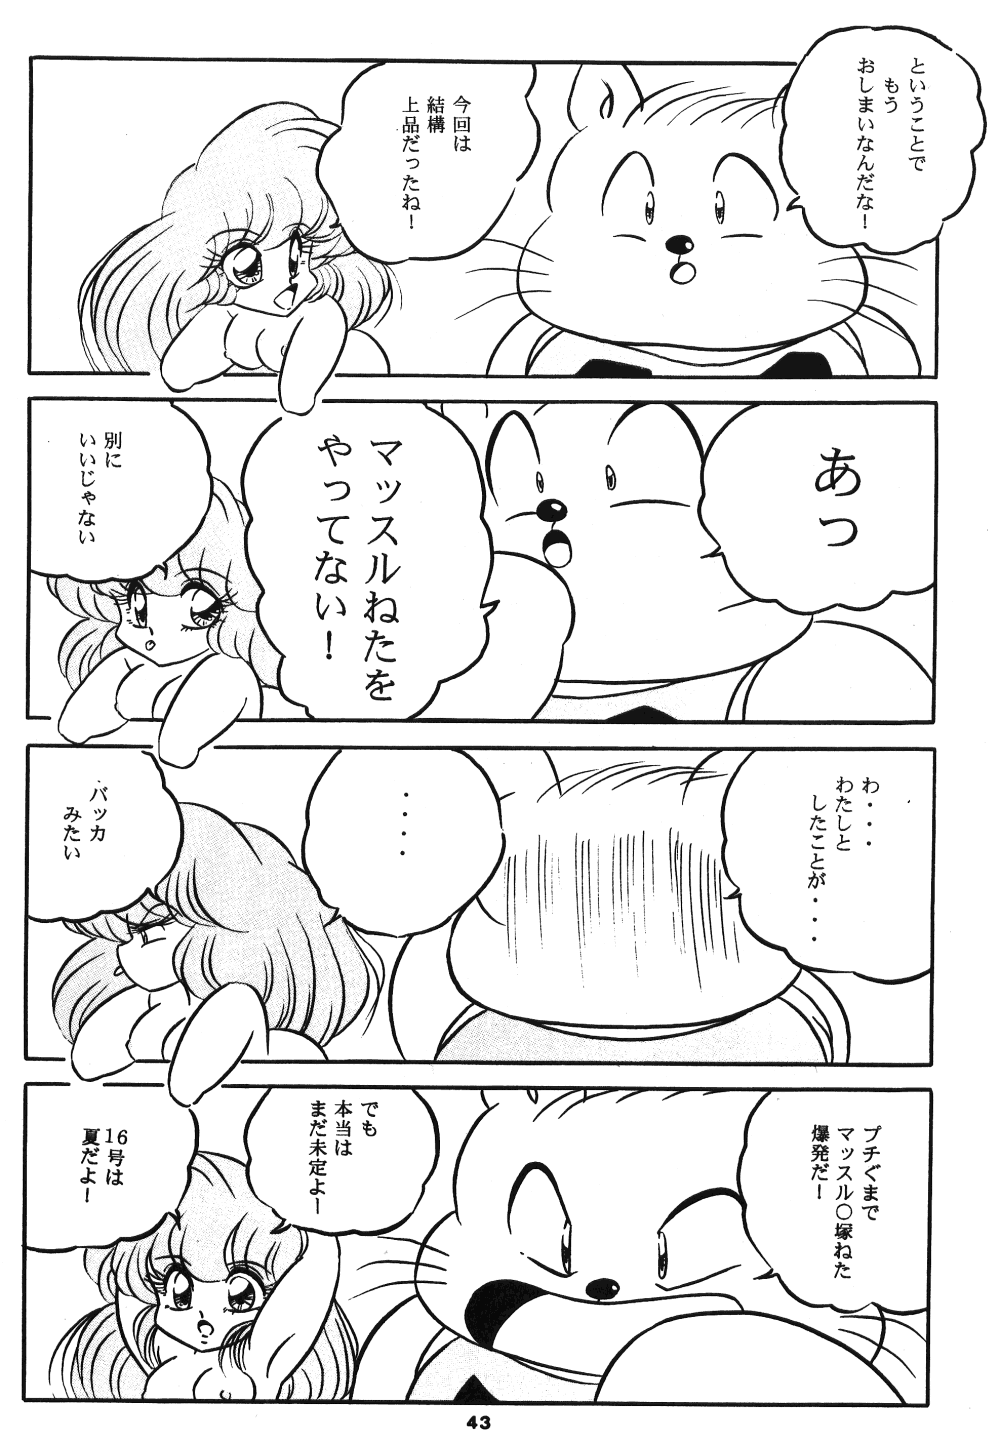 [C-Company] C-COMPANY SPECIAL STAGE 15 (Darkstalkers, Ranma 1/2) page 44 full